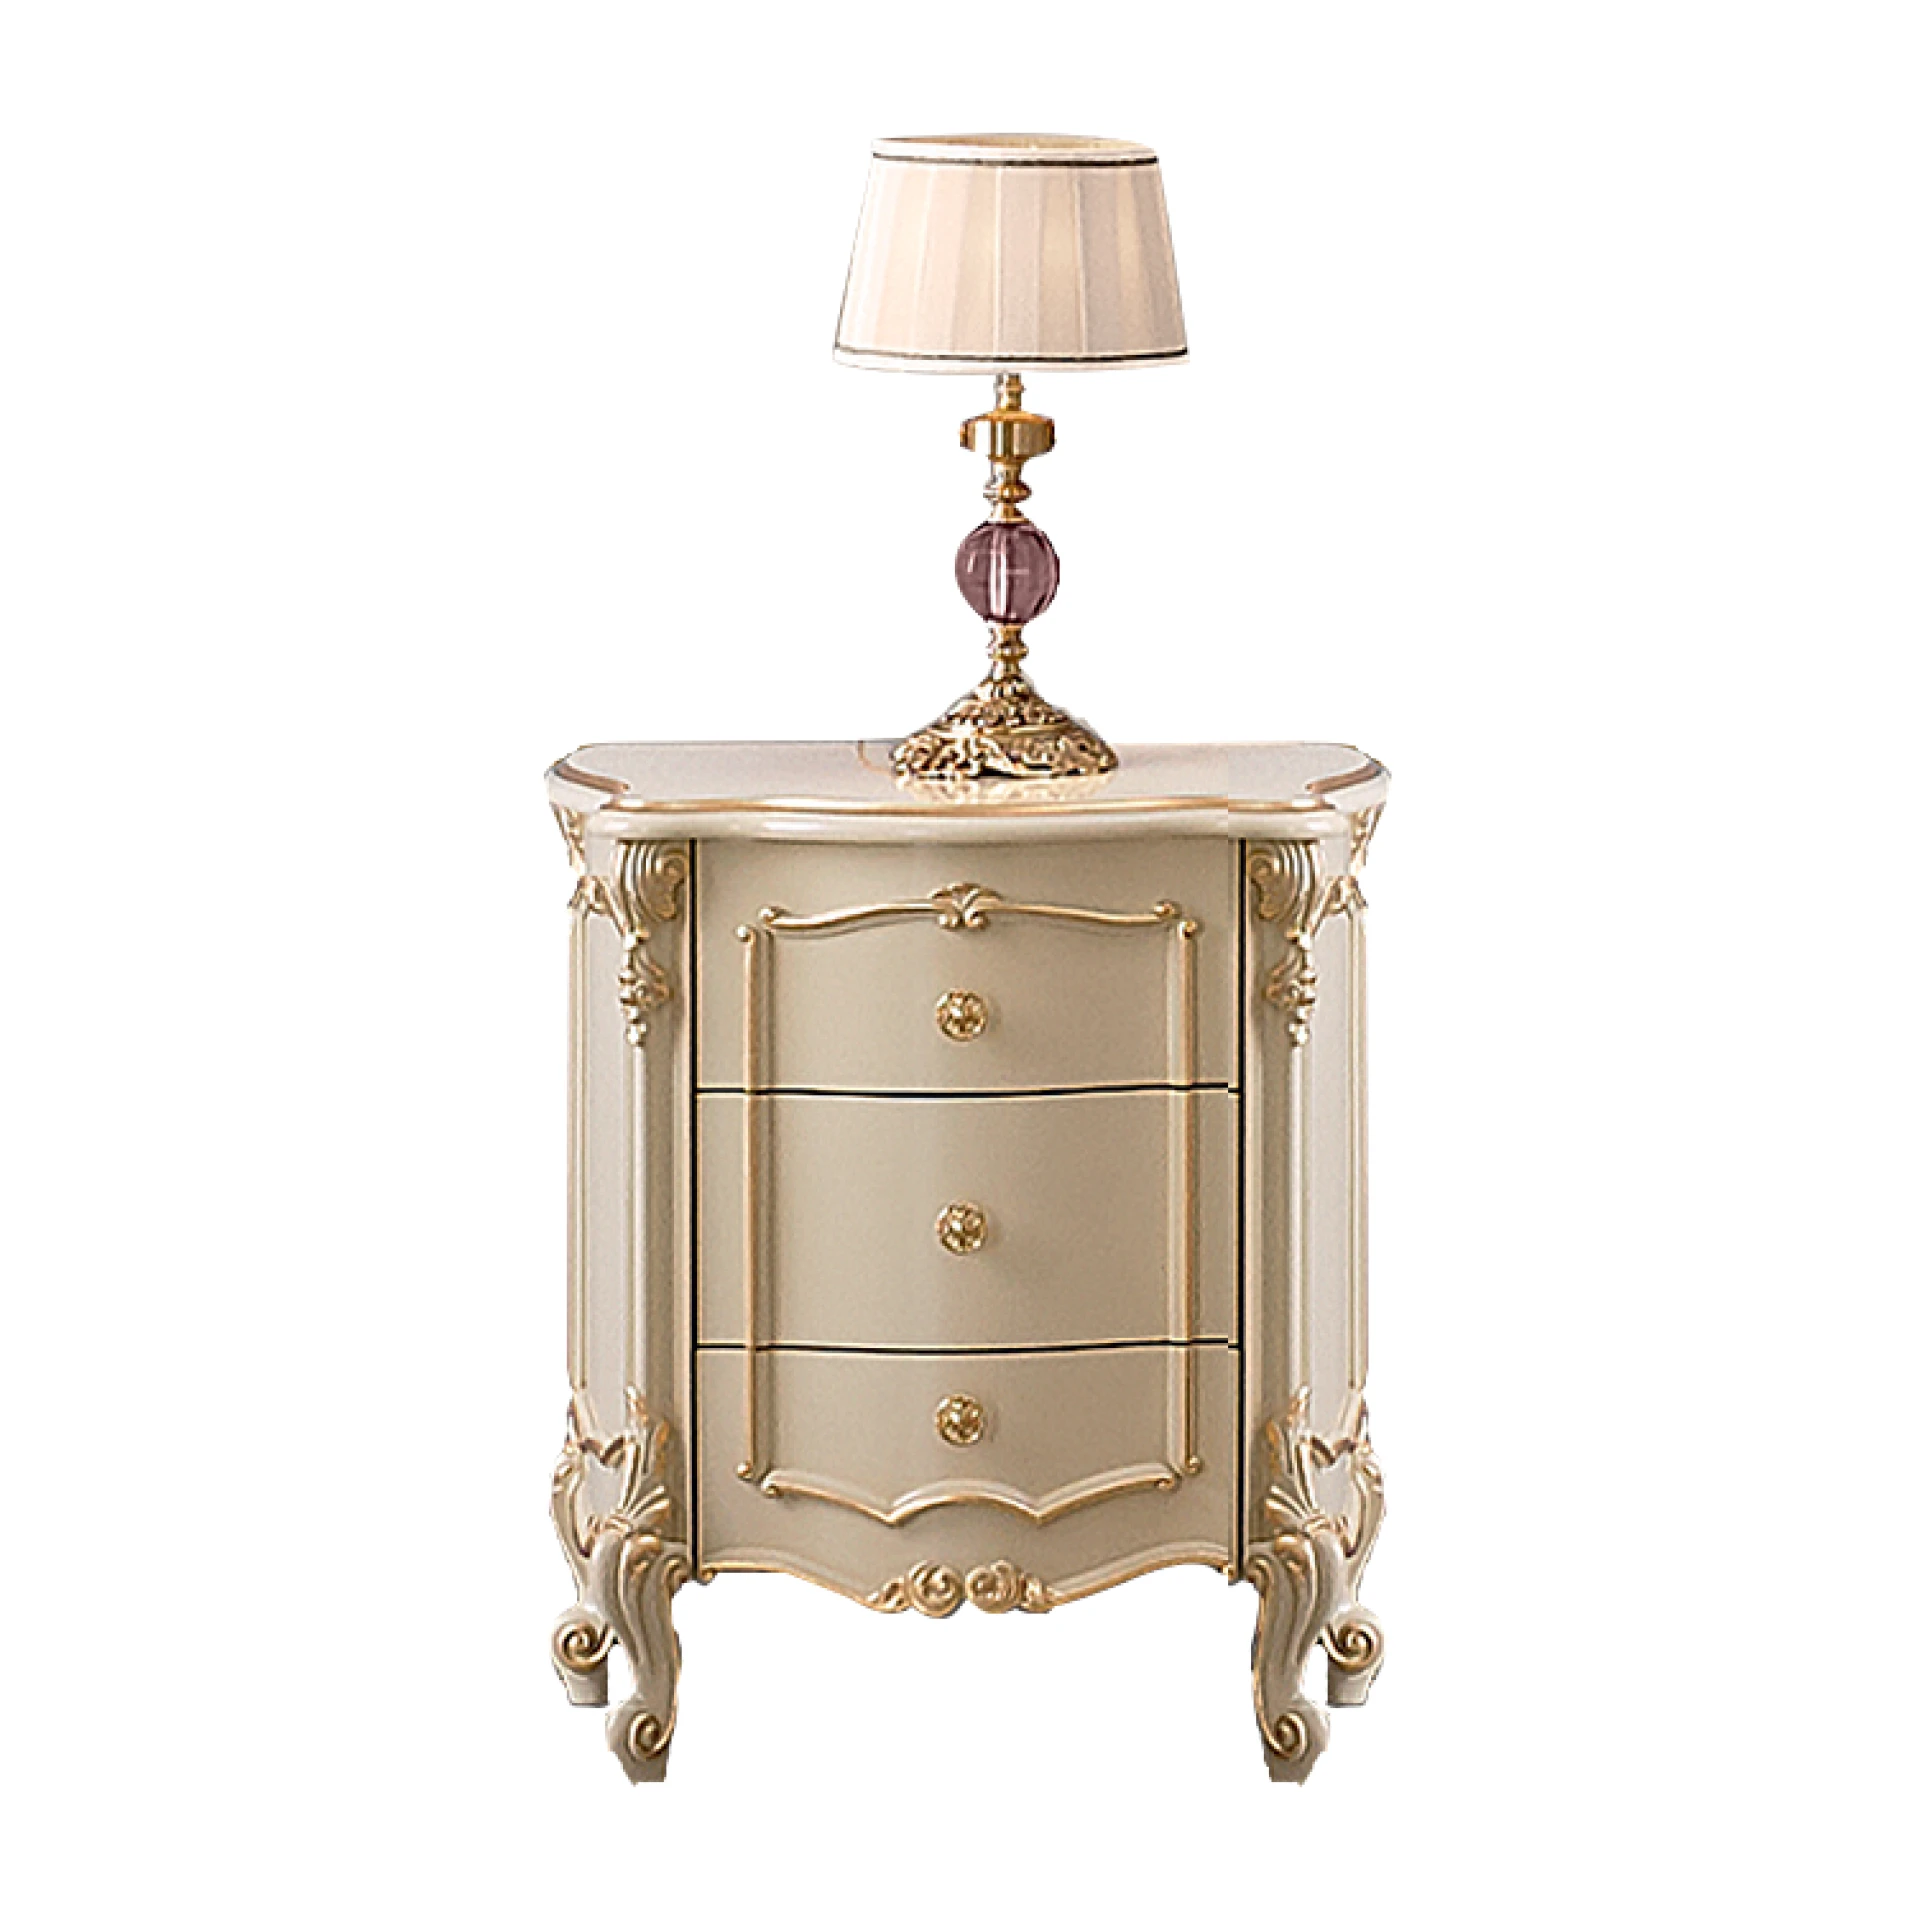 Elegance meets functionality with our Classic Style Cream Night Table. Crafted to perfection, it seamlessly blends into any bedroom decor, offering ample storage and timeless charm.